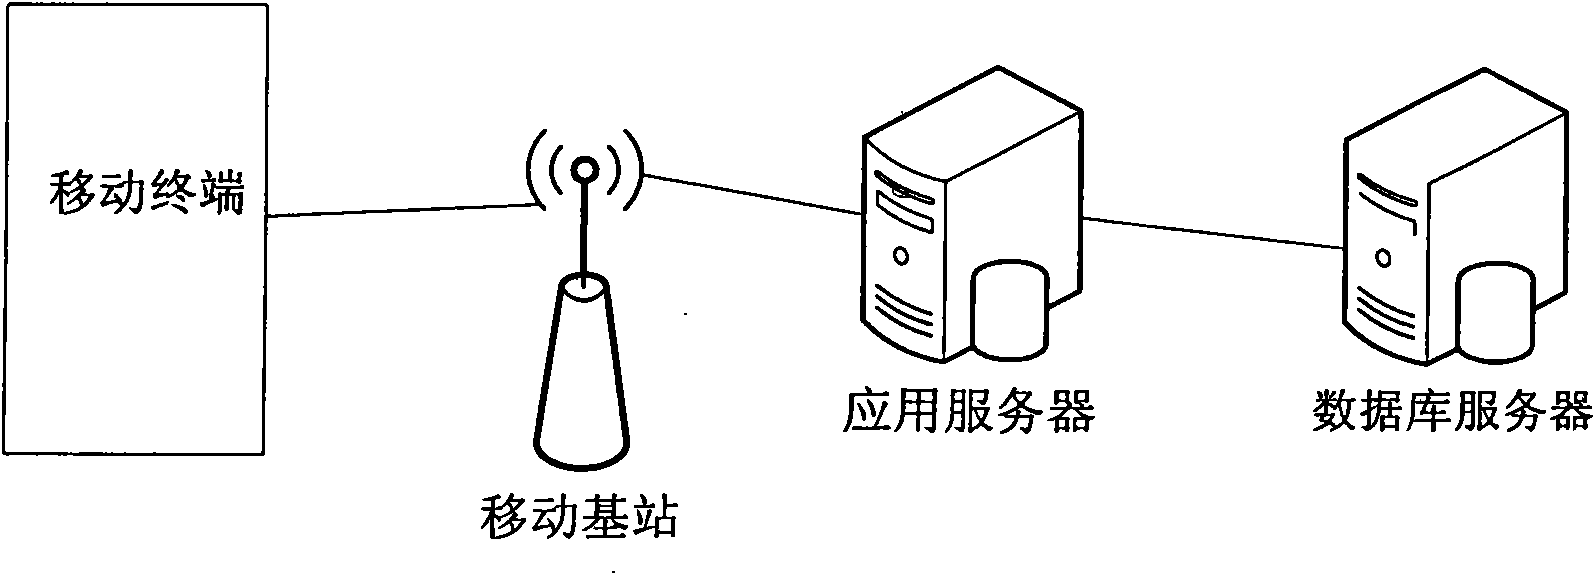 Car sharing service system and method based on mobile terminal